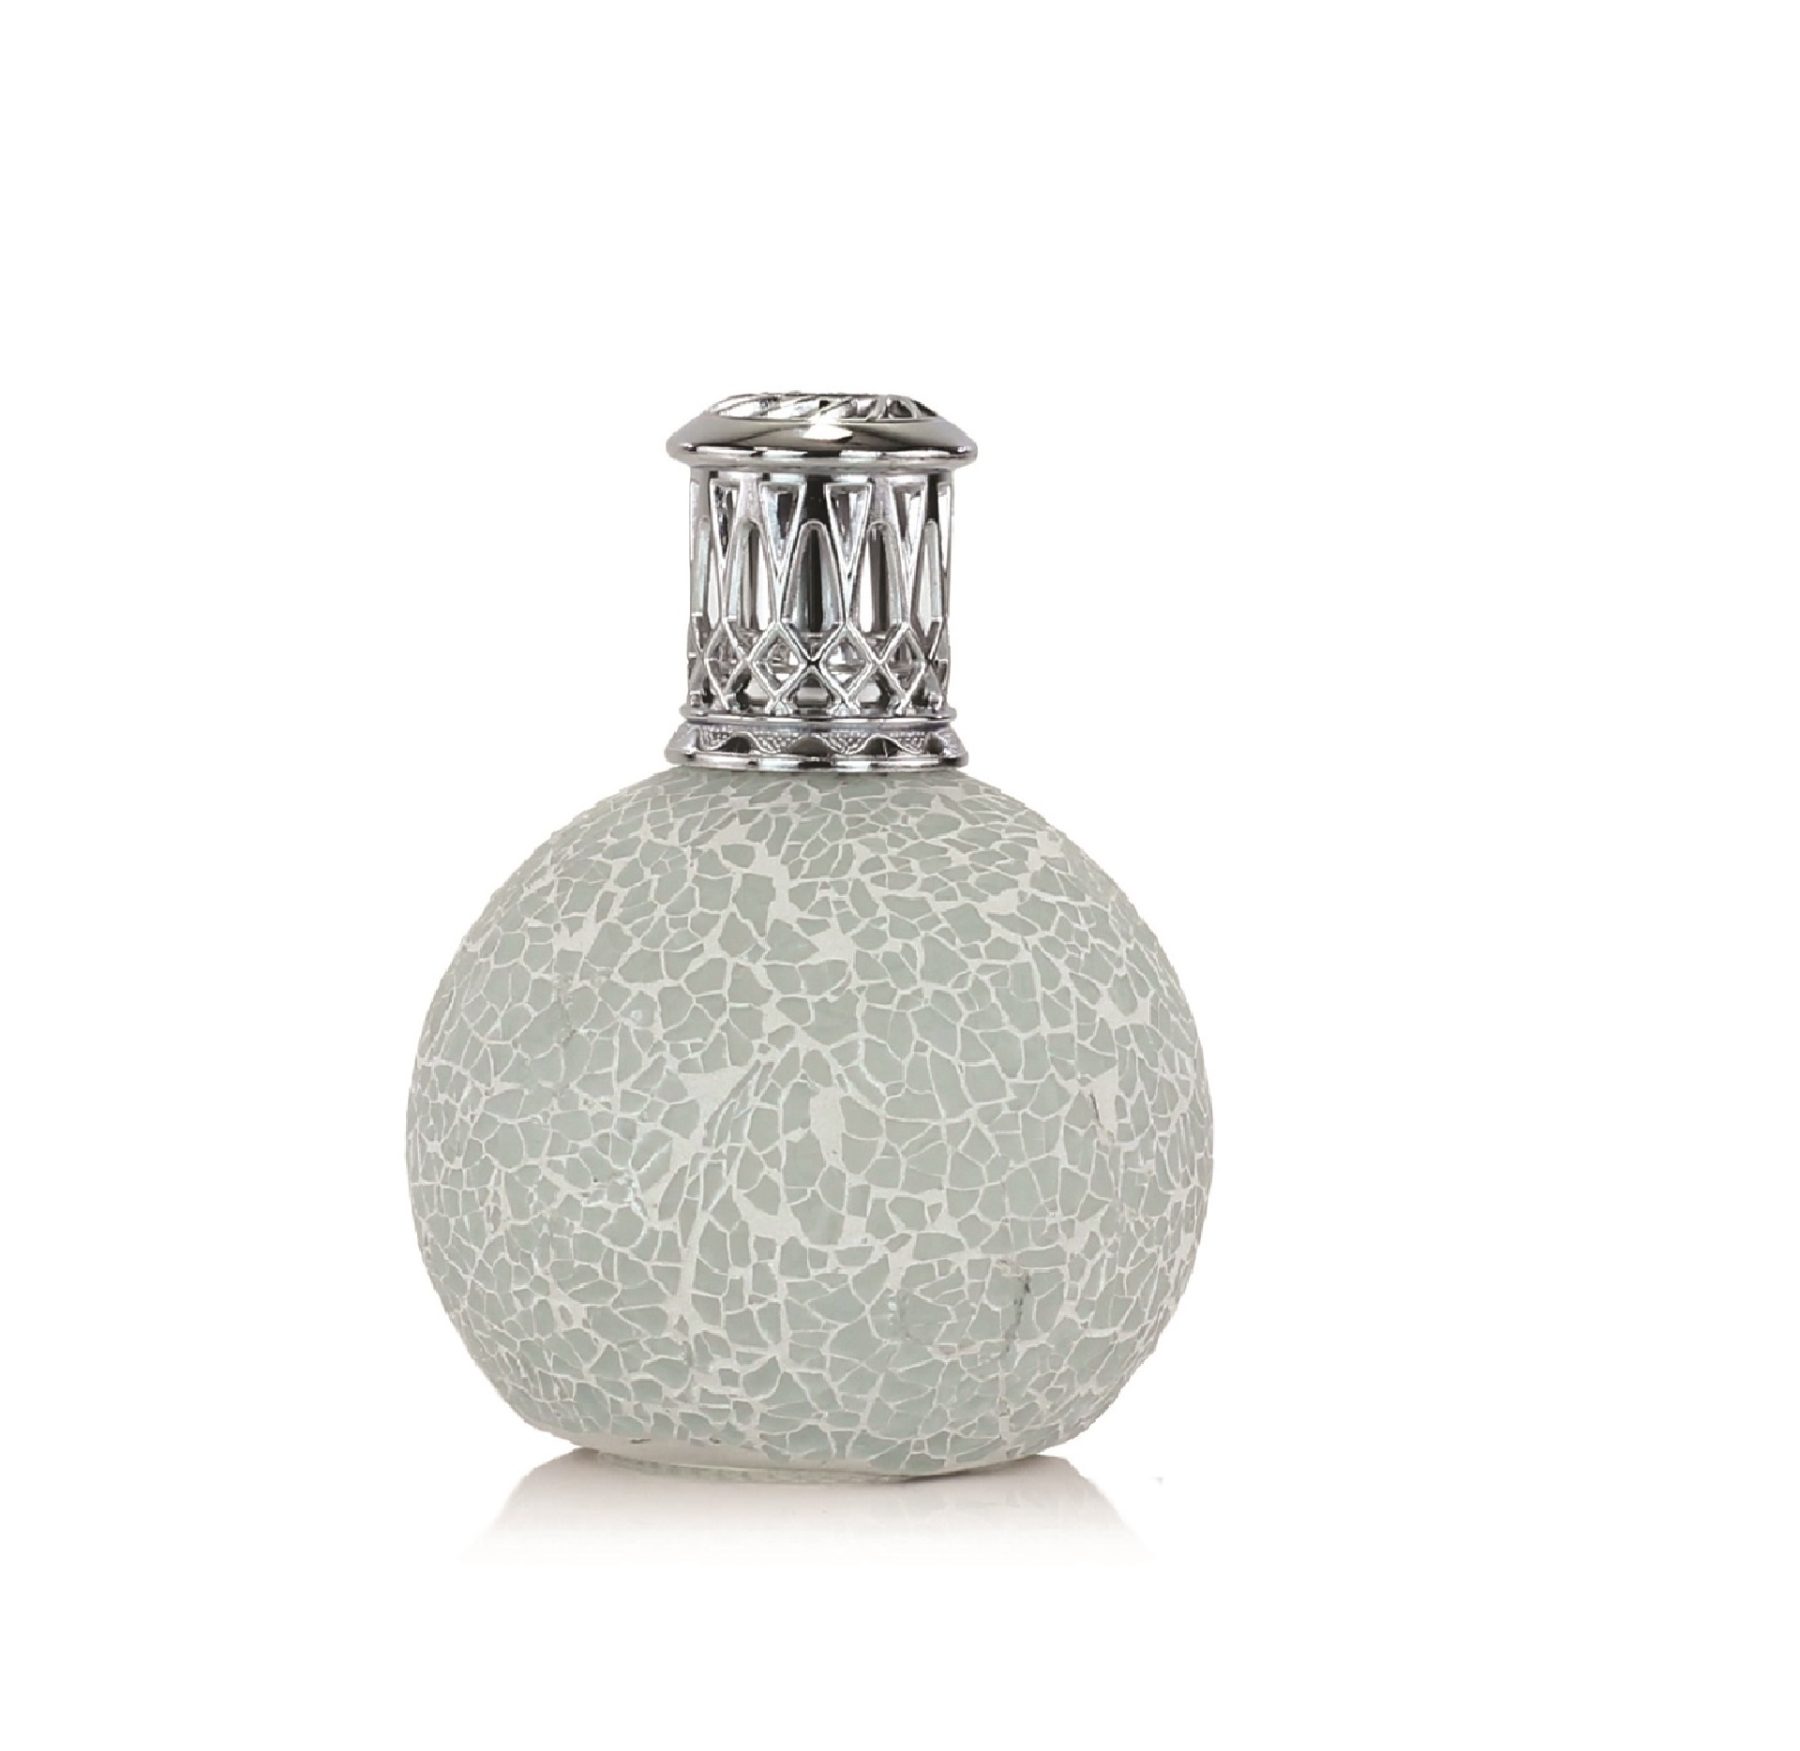 A & B Frozen in Time Fragrance Lamp